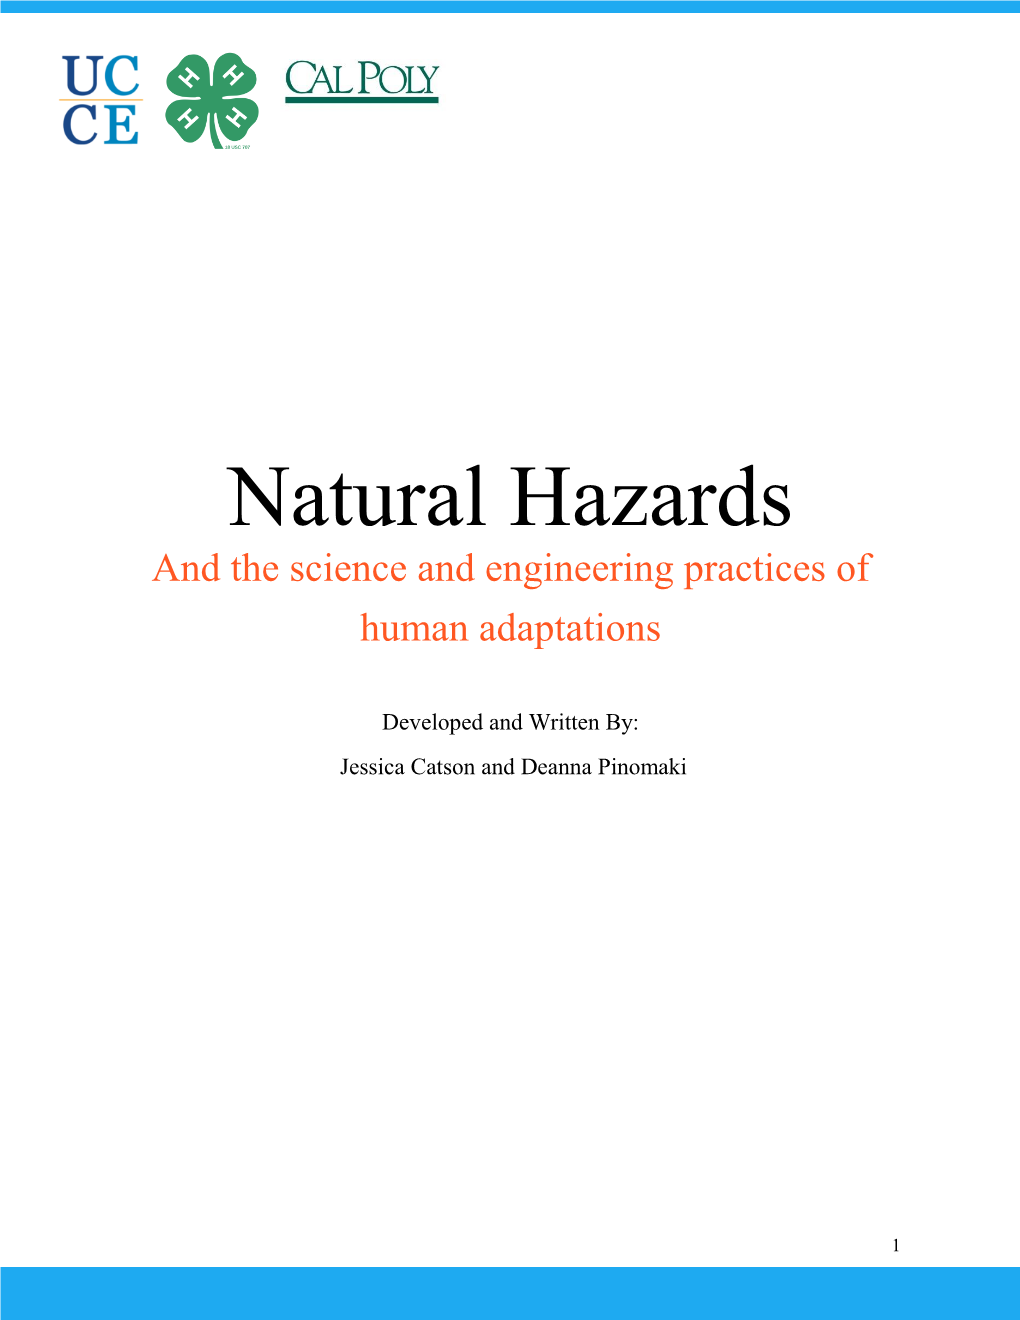 Natural Hazards and the Science and Engineering Practices of Human Adaptations